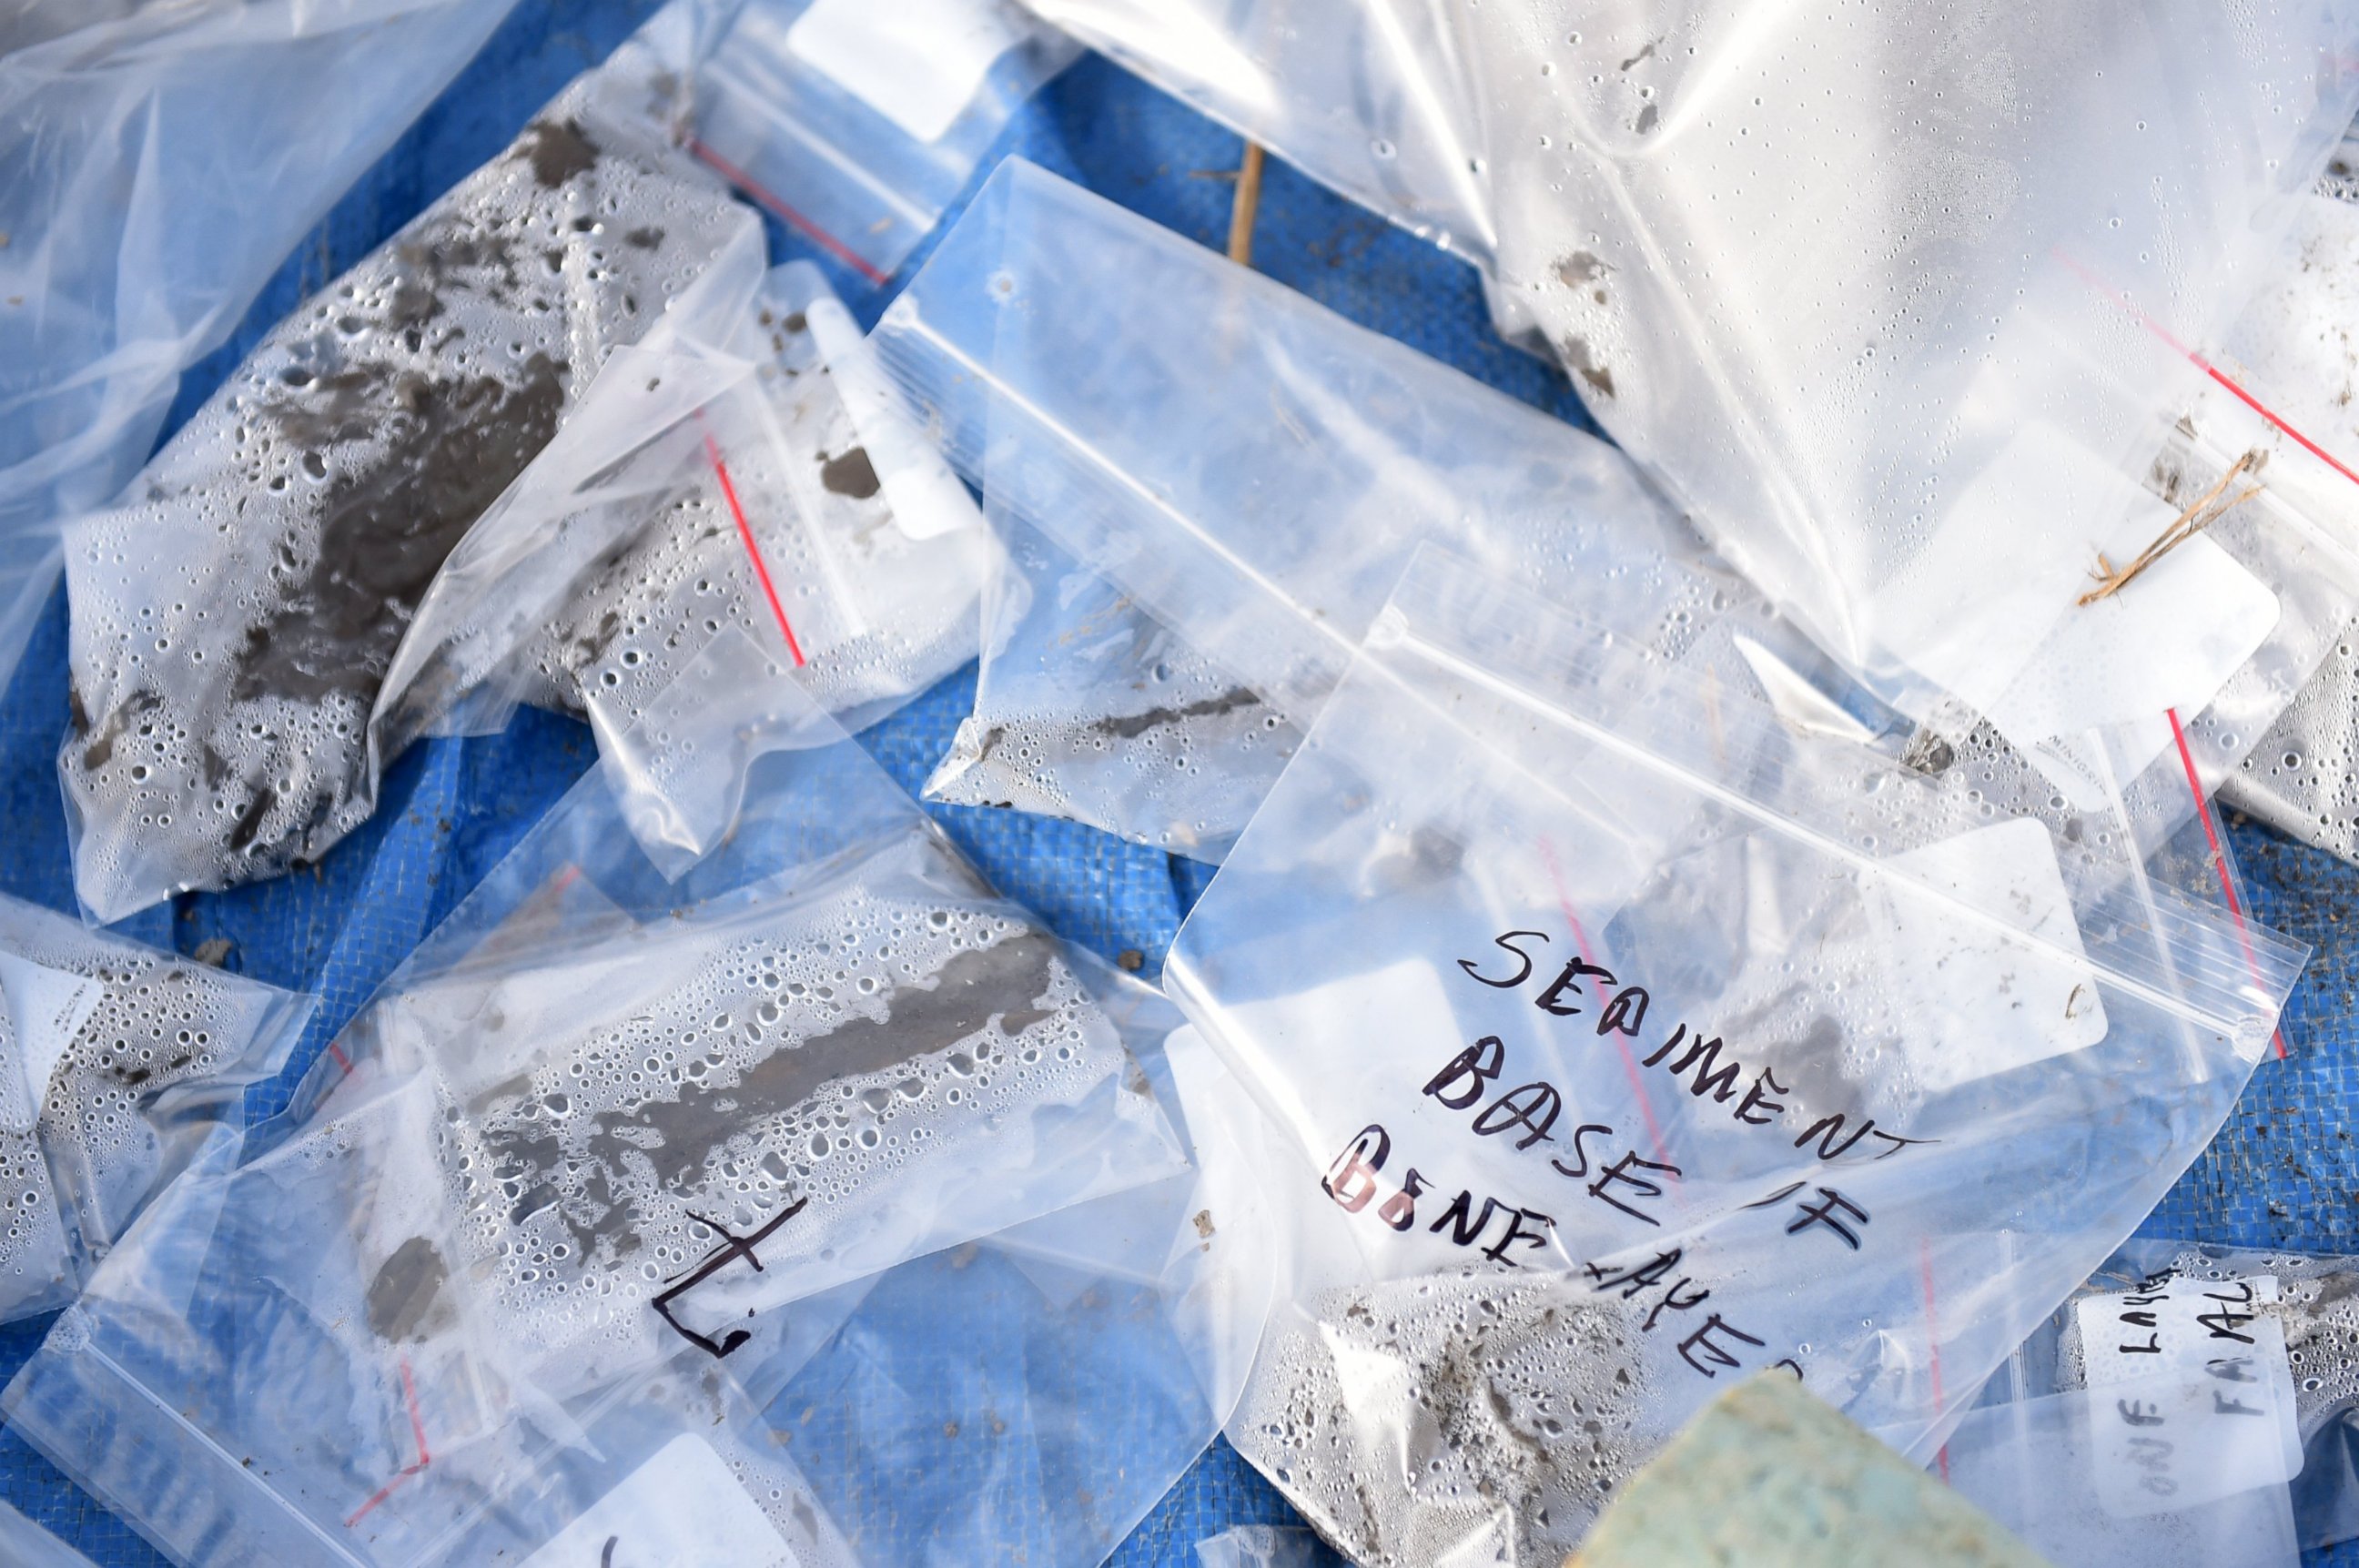 PHOTO: Material recovered during a woolly mammoth excavation sits in baggies on a farm in Lima Township, Mich., Oct. 1, 2015.